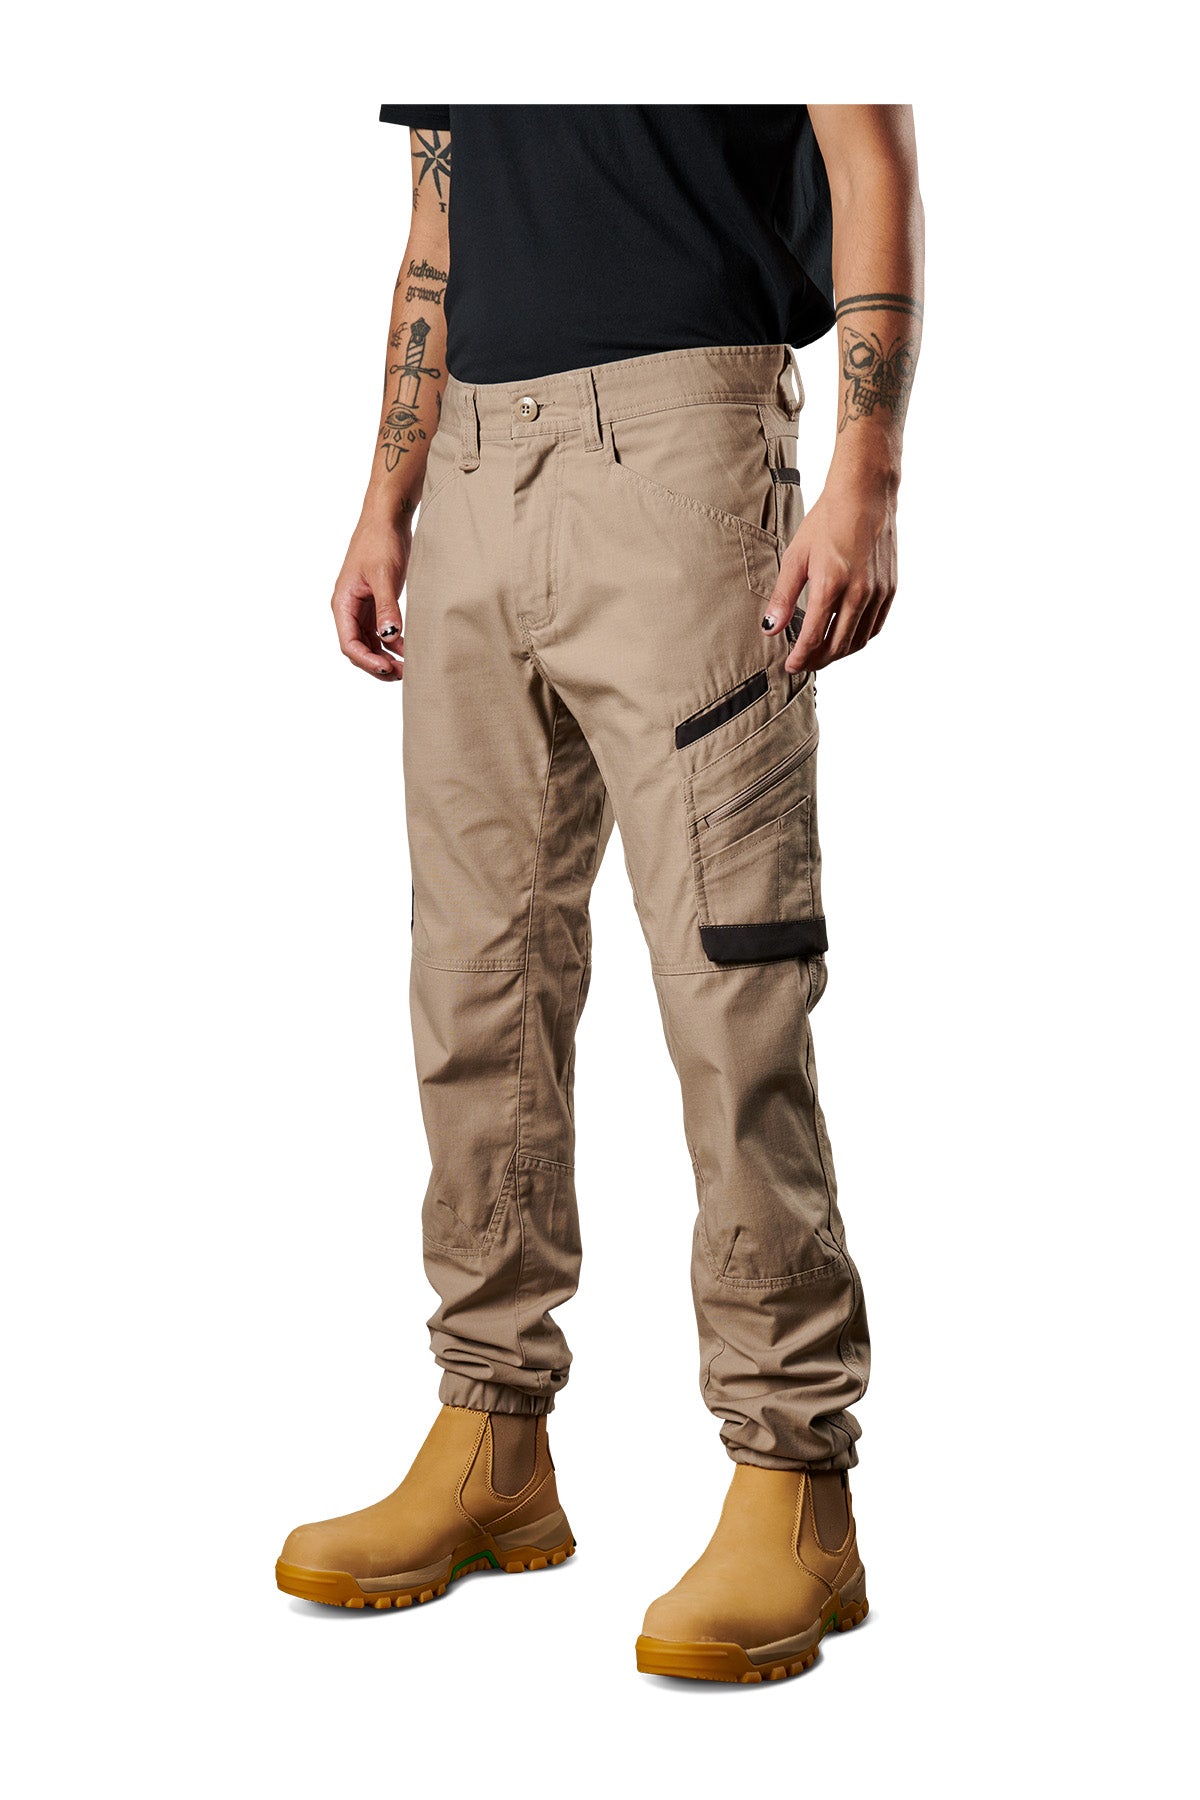 FXD WP-11 Mens Ripstop Cuffed Work Pant